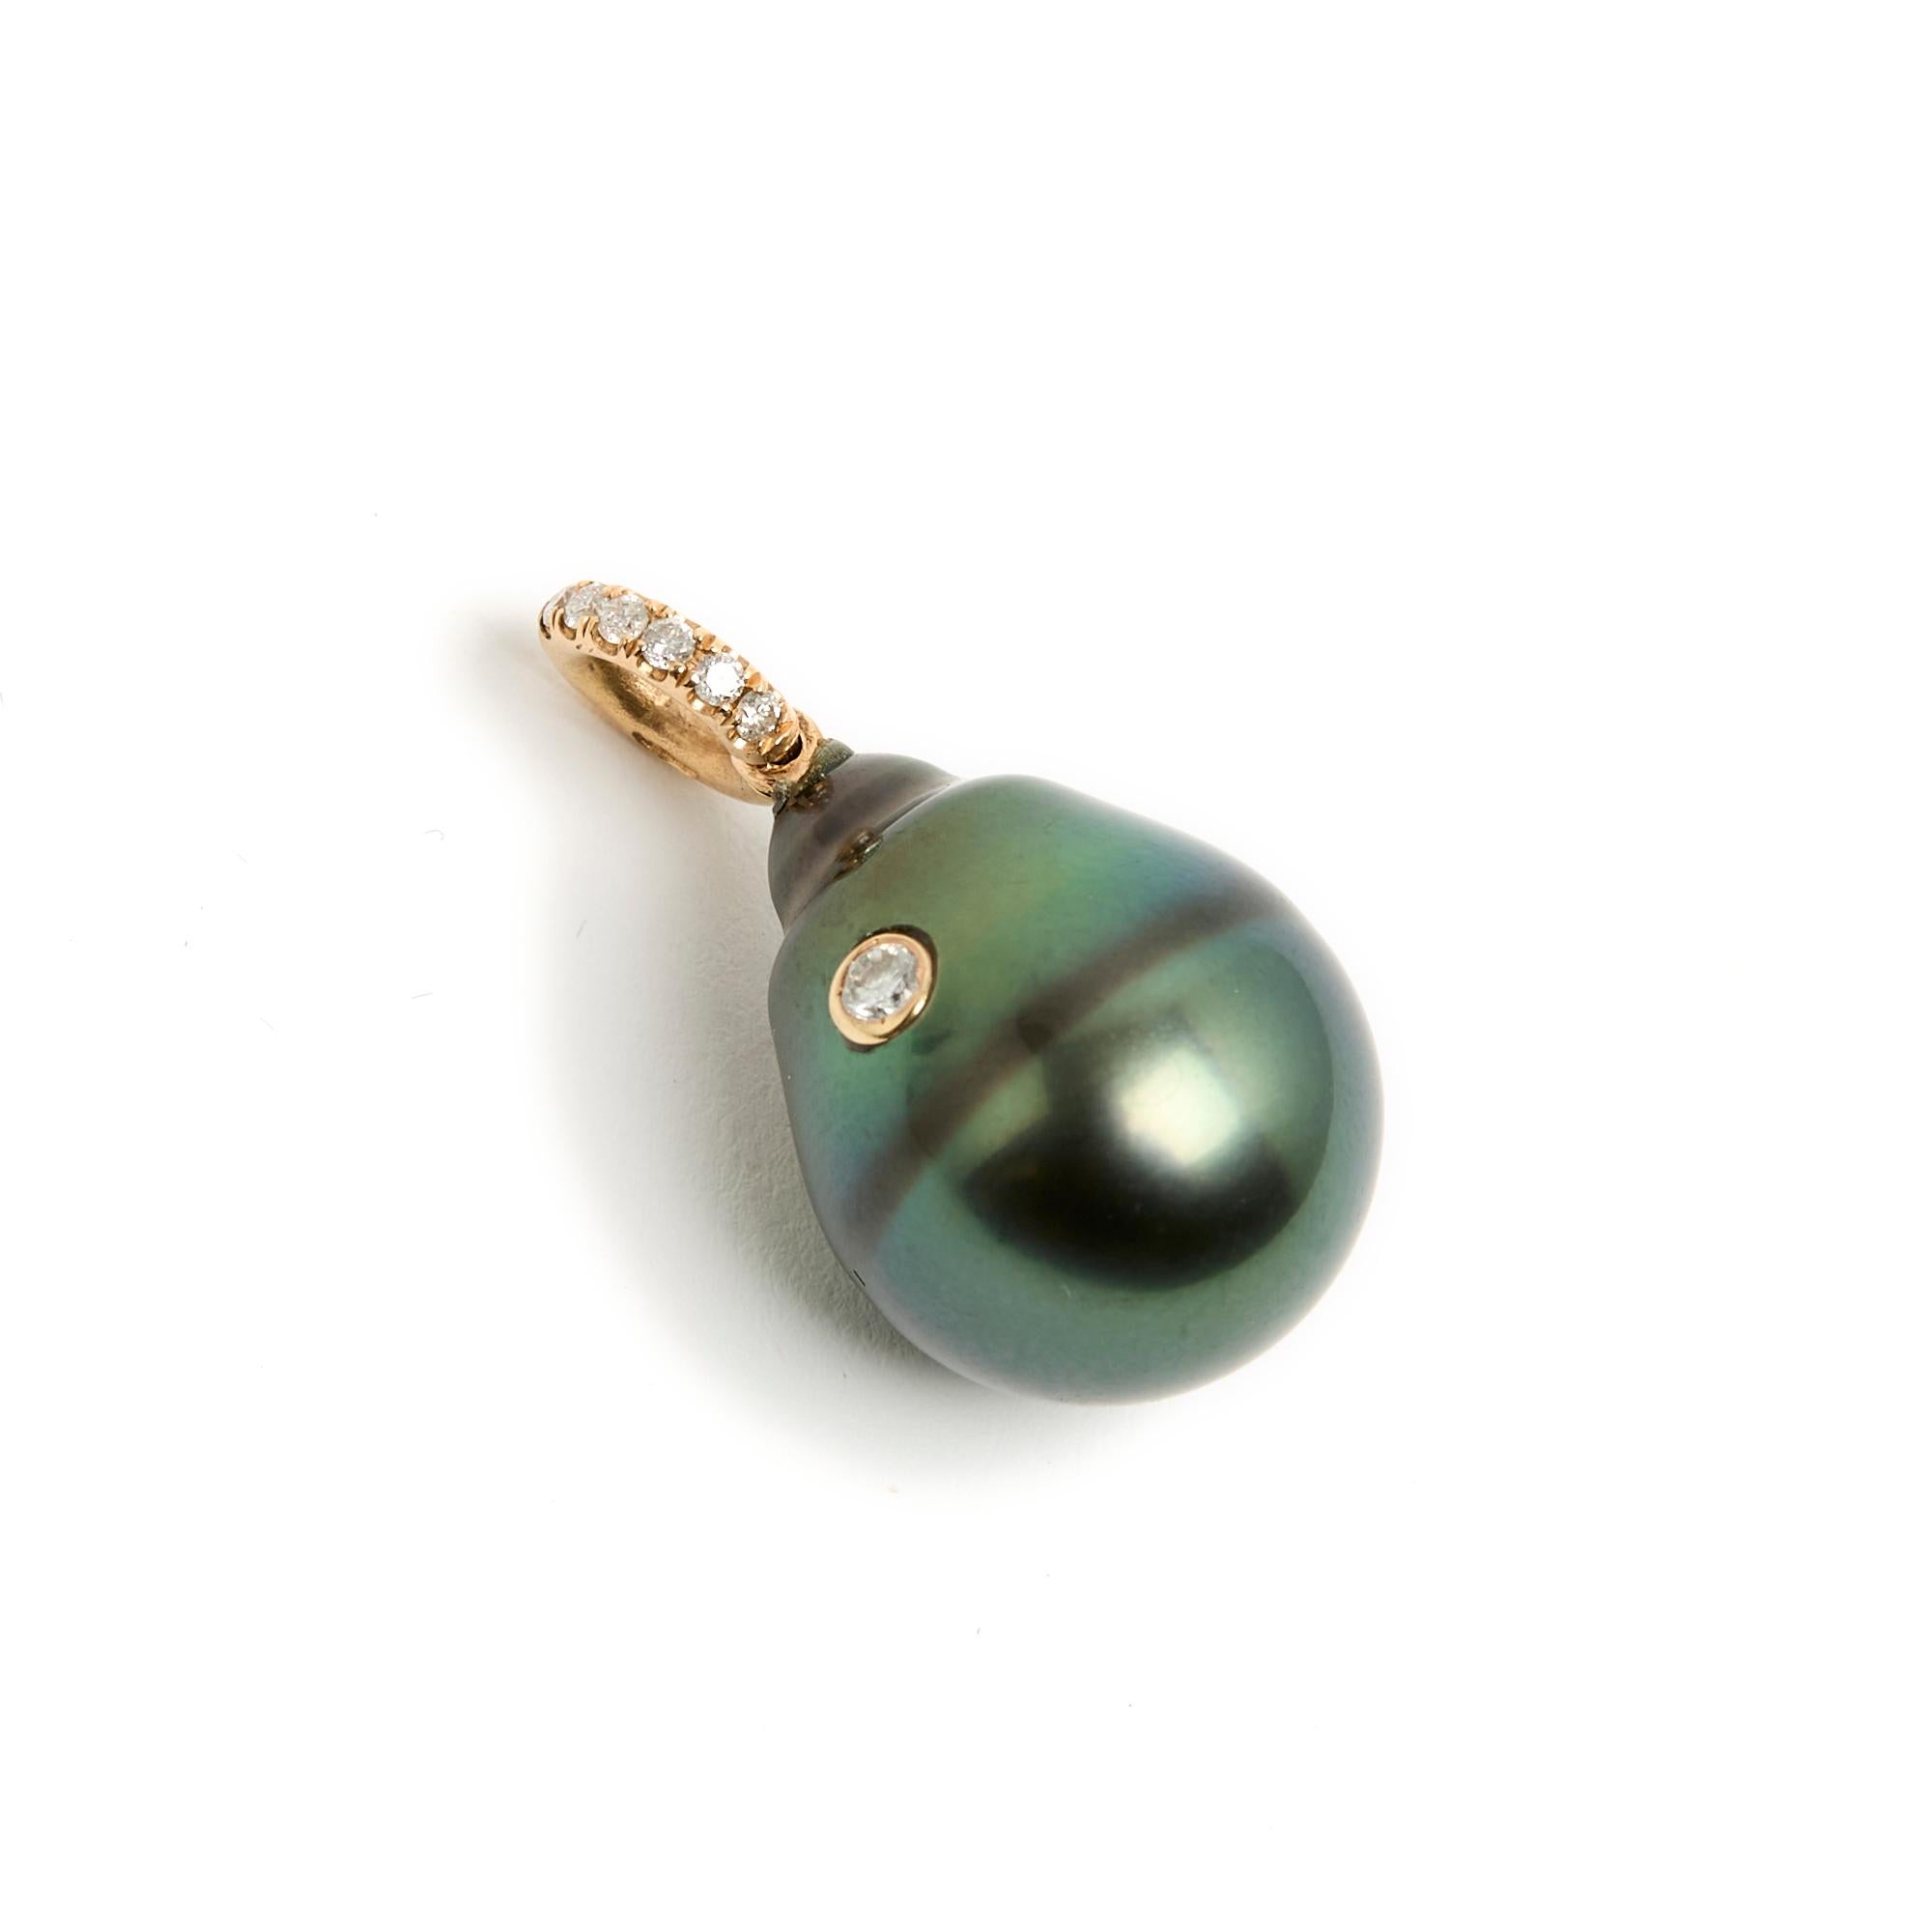 Pendant composed of a drop-shaped Tahitian pearl in a changing gray color encrusted with a small diamond bezel-set in pink gold, and mounted on a rose gold bail encrusted with brilliants. Total length of the pendant 2.75 cm, width of the pearl 1.5